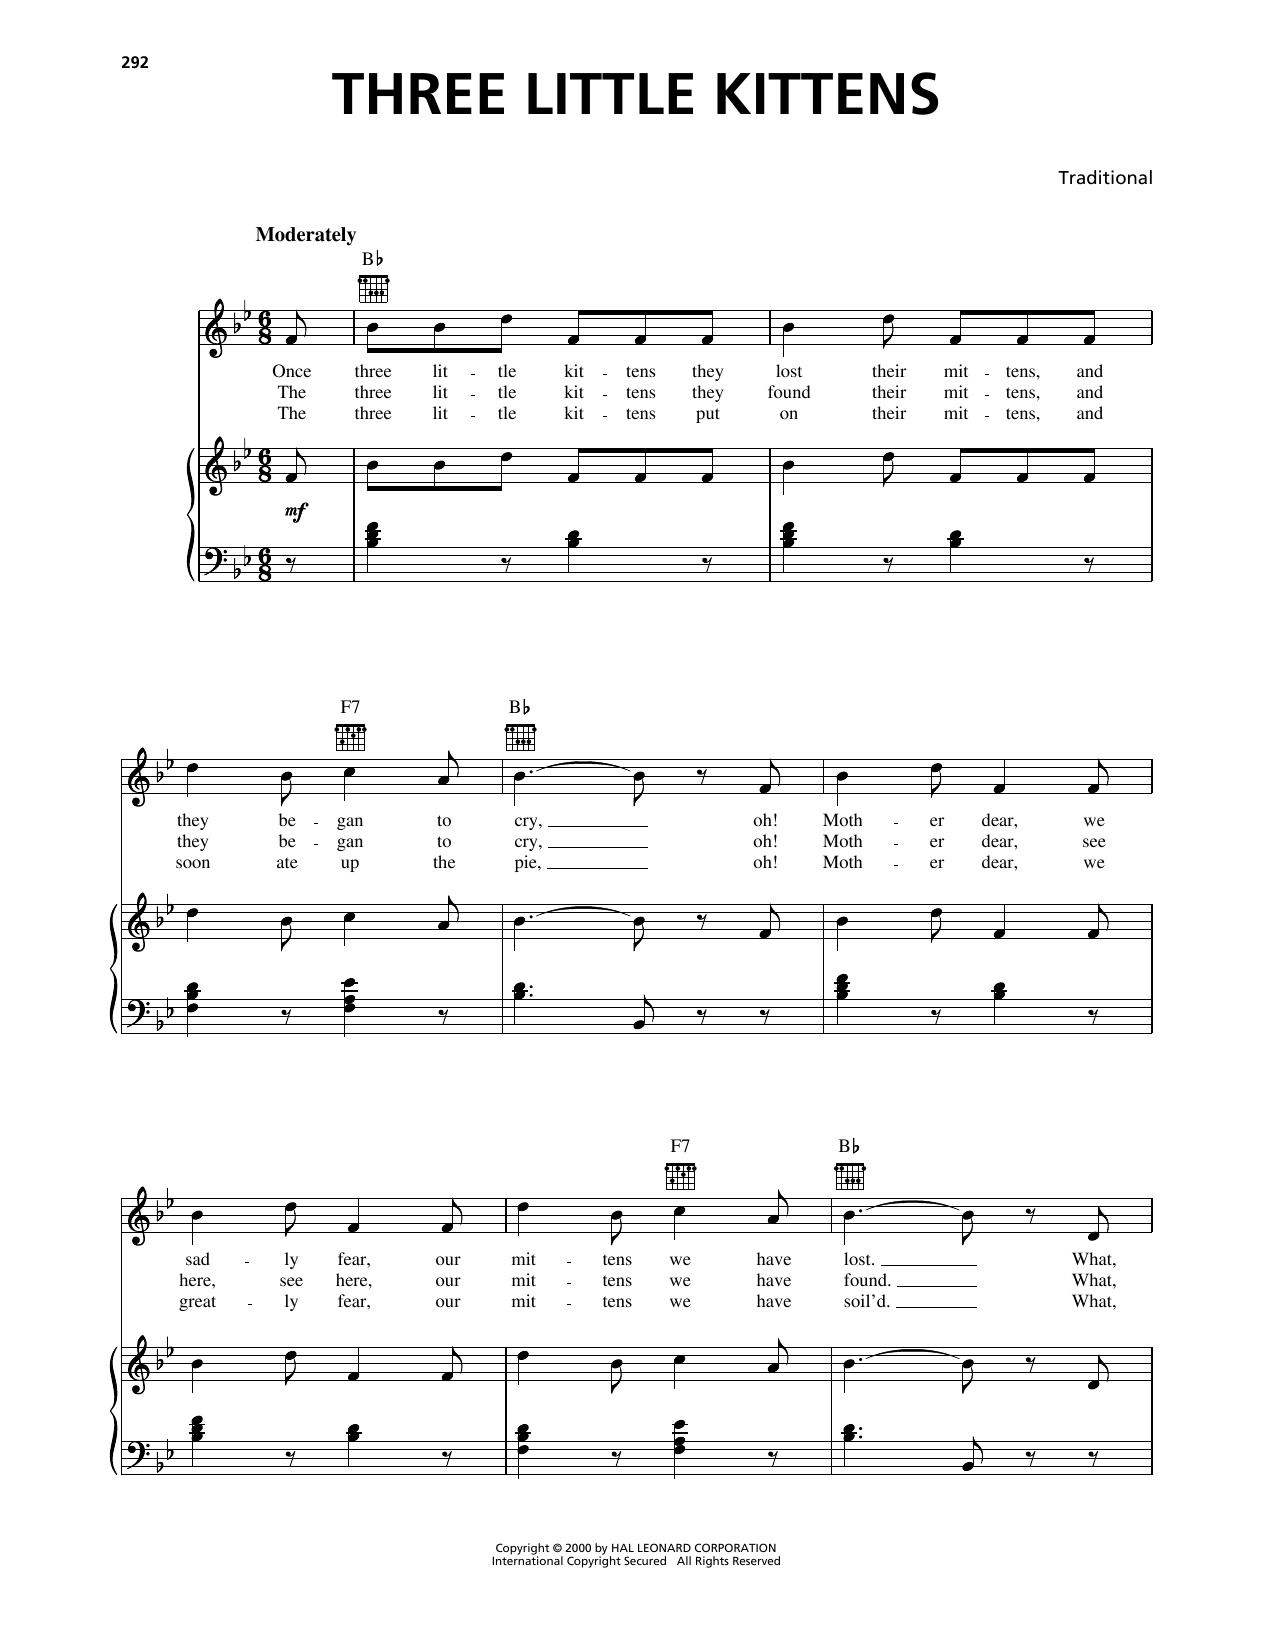 Download Traditional Three Little Kittens Sheet Music